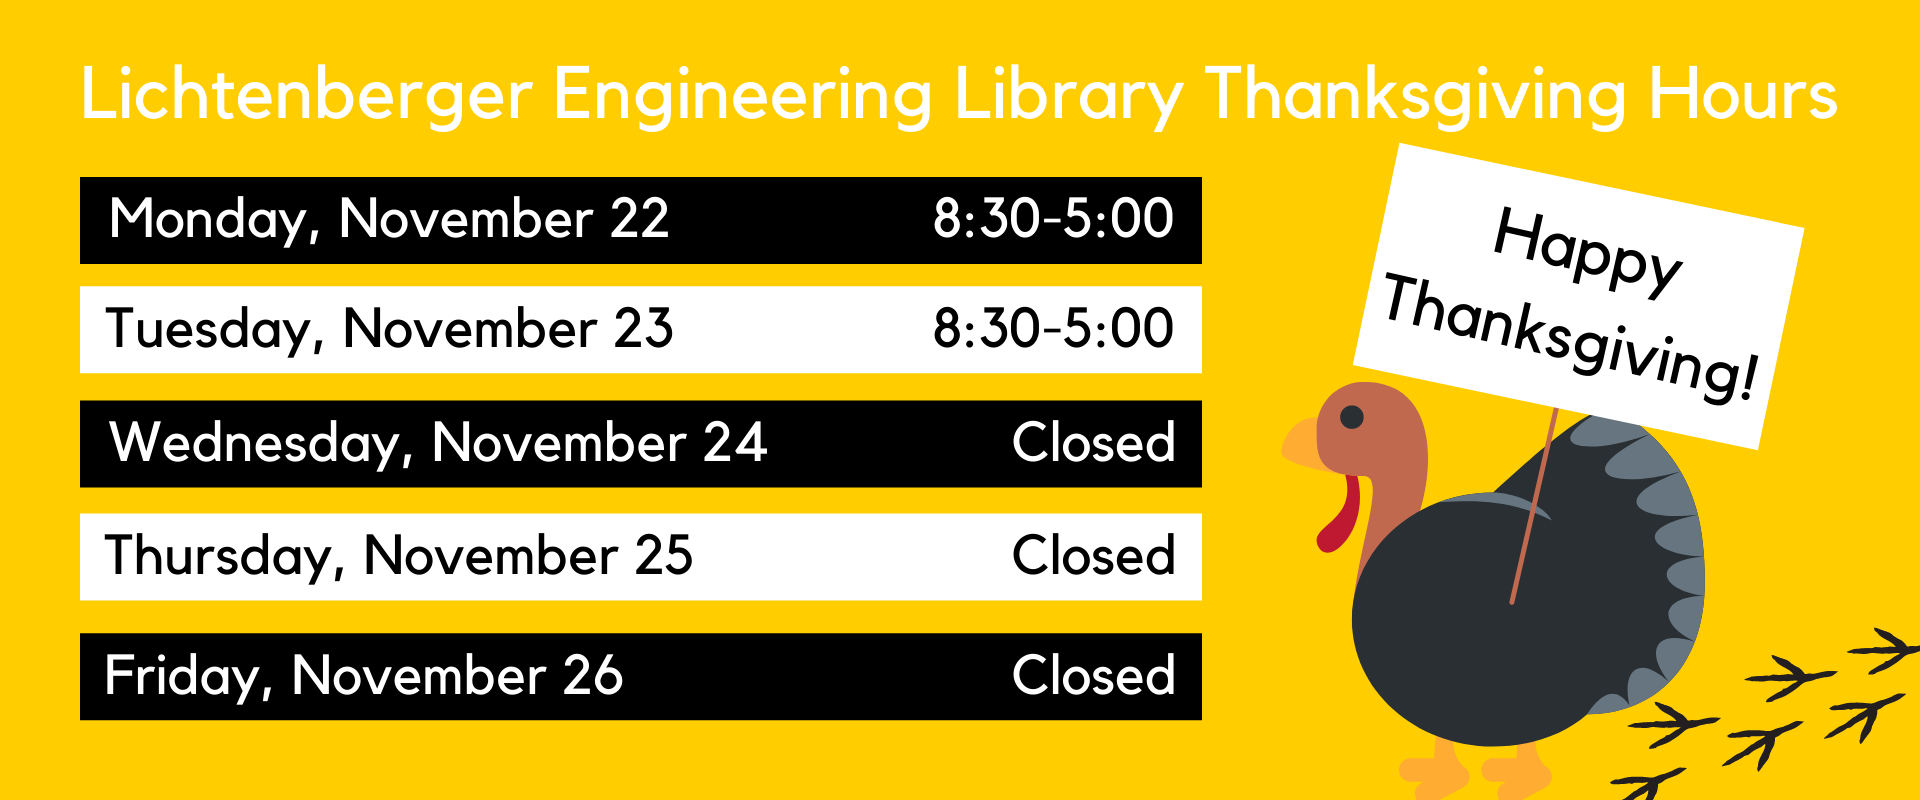 Fall 2021 Thanksgiving Hours